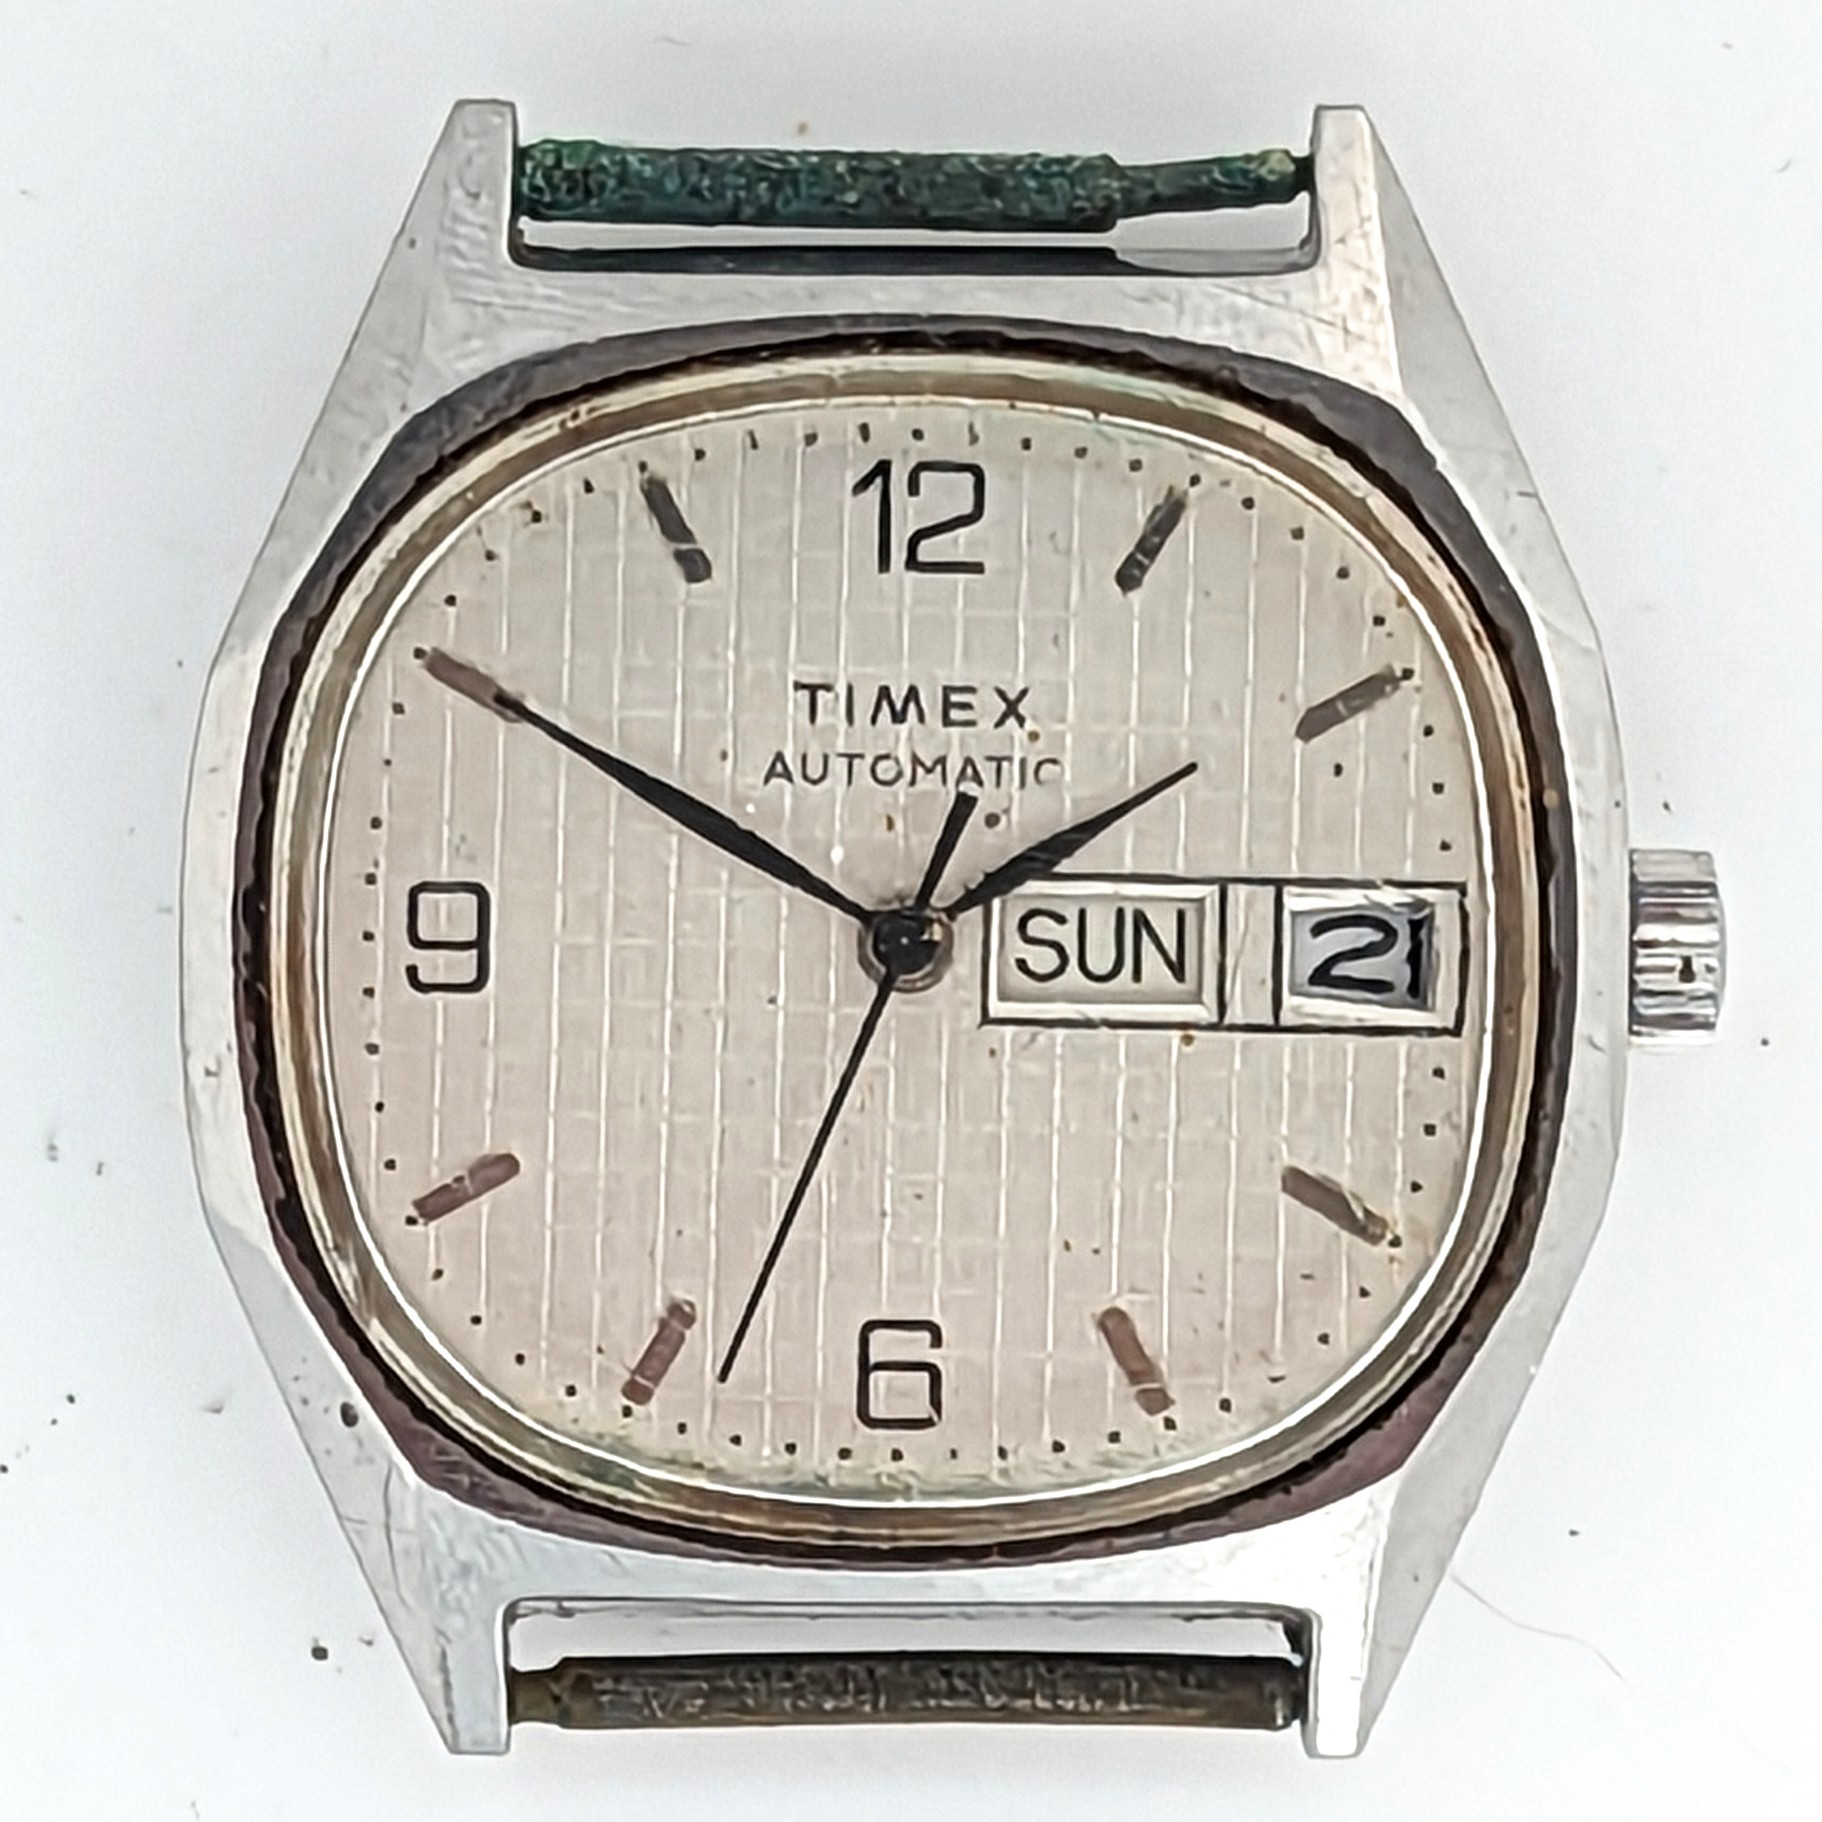 Timex Automatic 36161 10980 [1980]